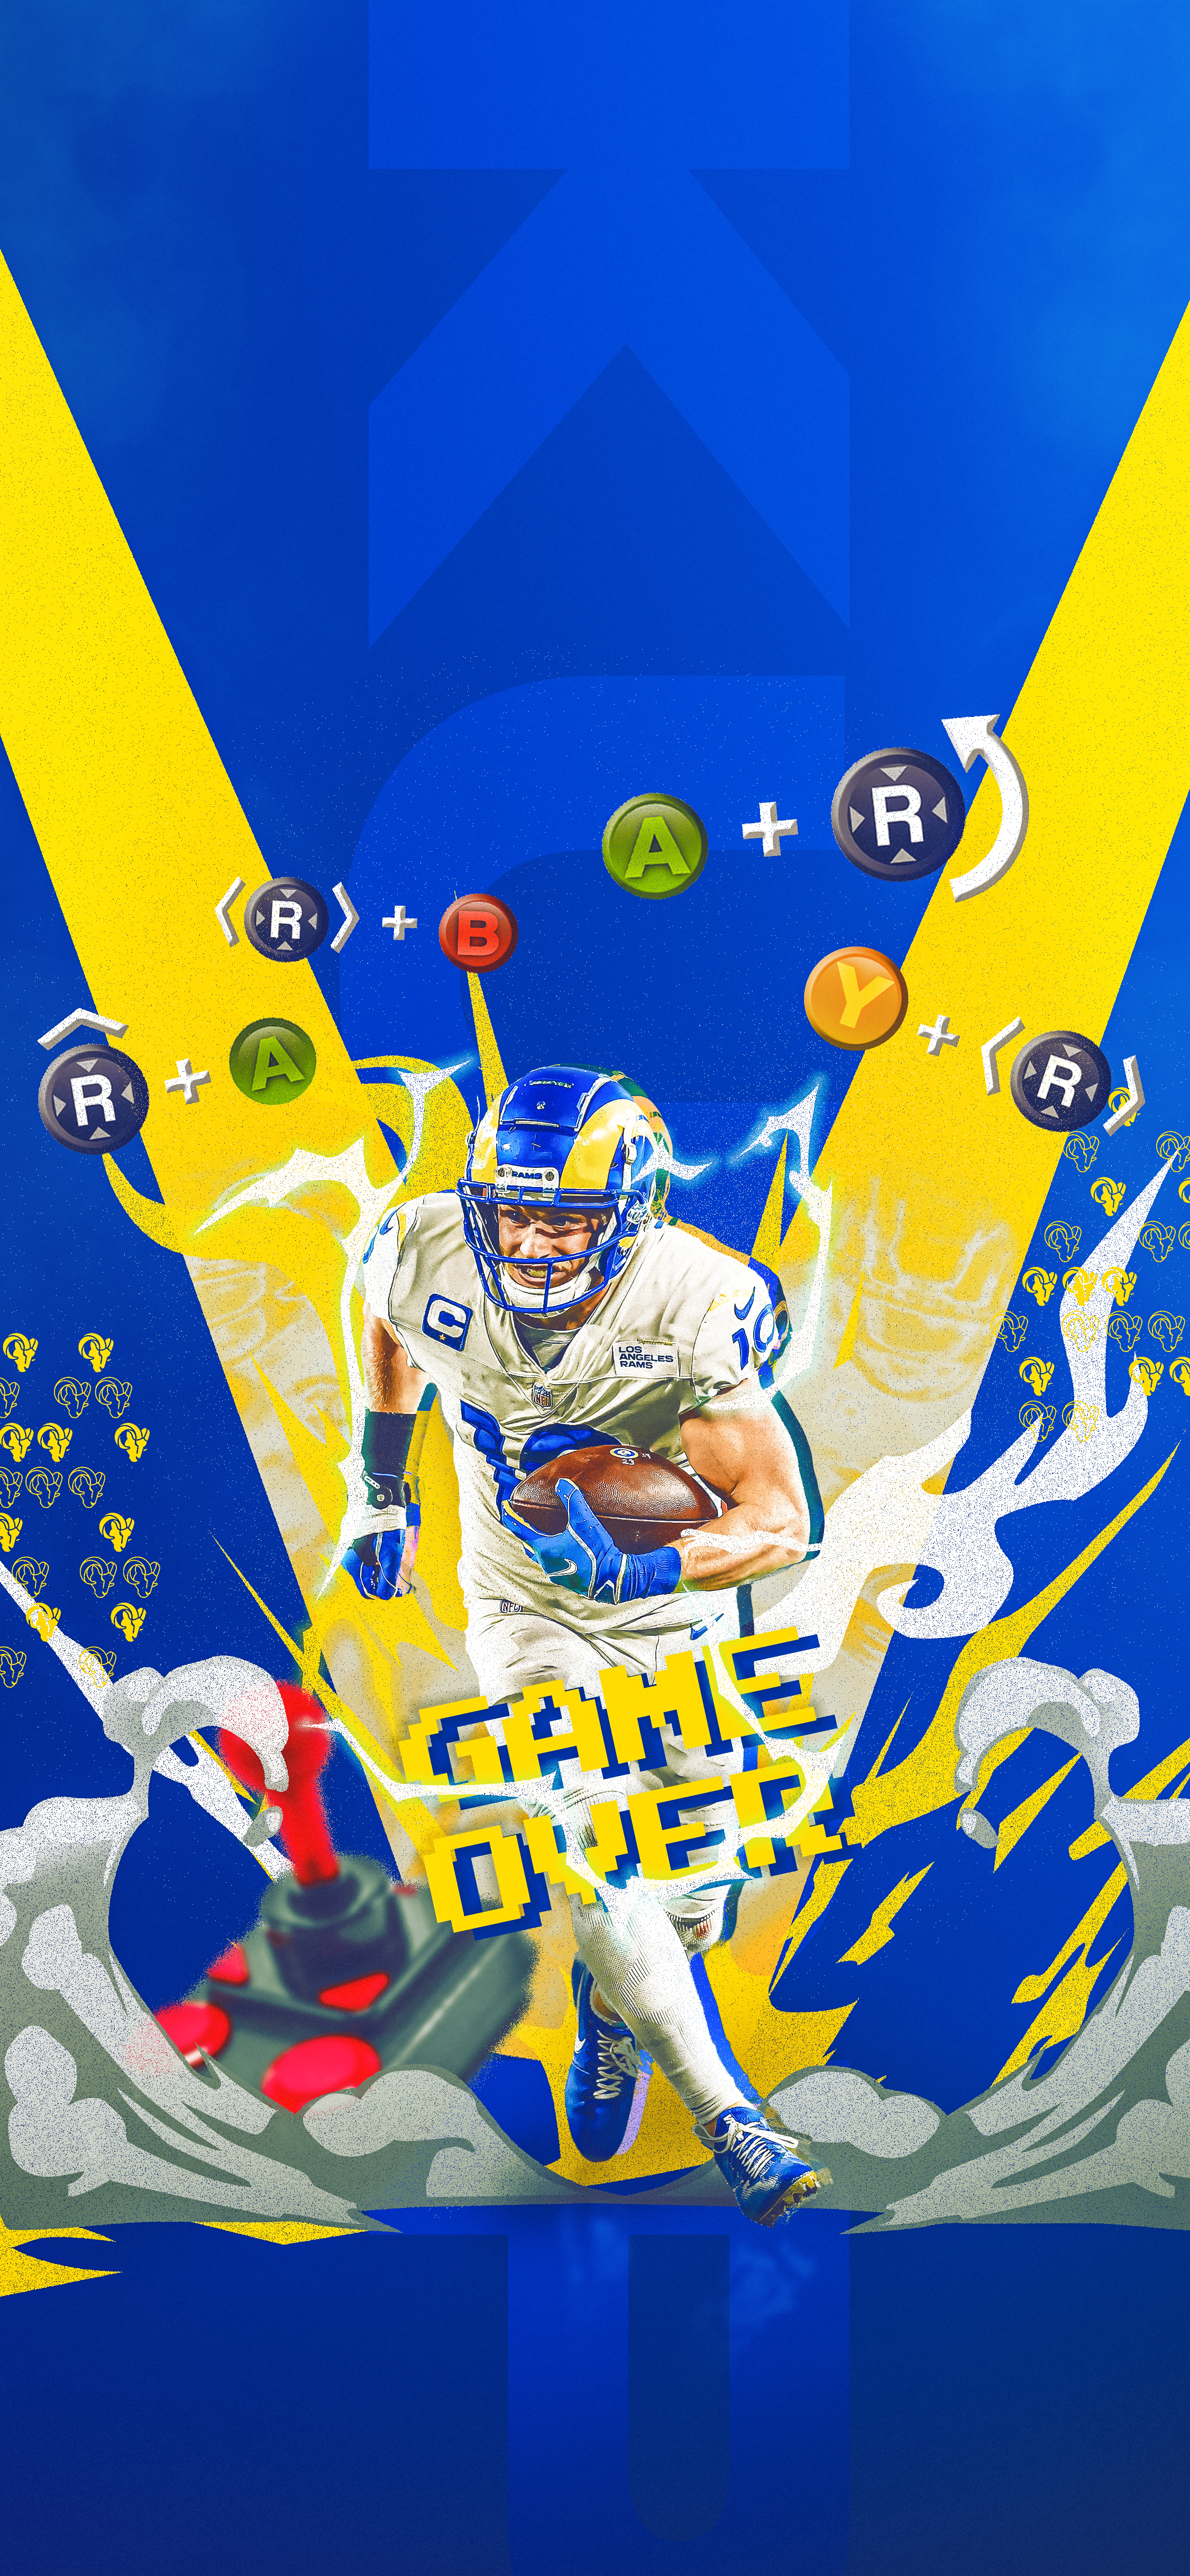 Free download Rams Wallpaper Los Angeles Rams theramscom [2250x4872] for your Desktop, Mobile & Tablet. Explore Rams Wallpaper. LA Rams Wallpaper, Rams Desktop Wallpaper, LA Rams Wallpaper